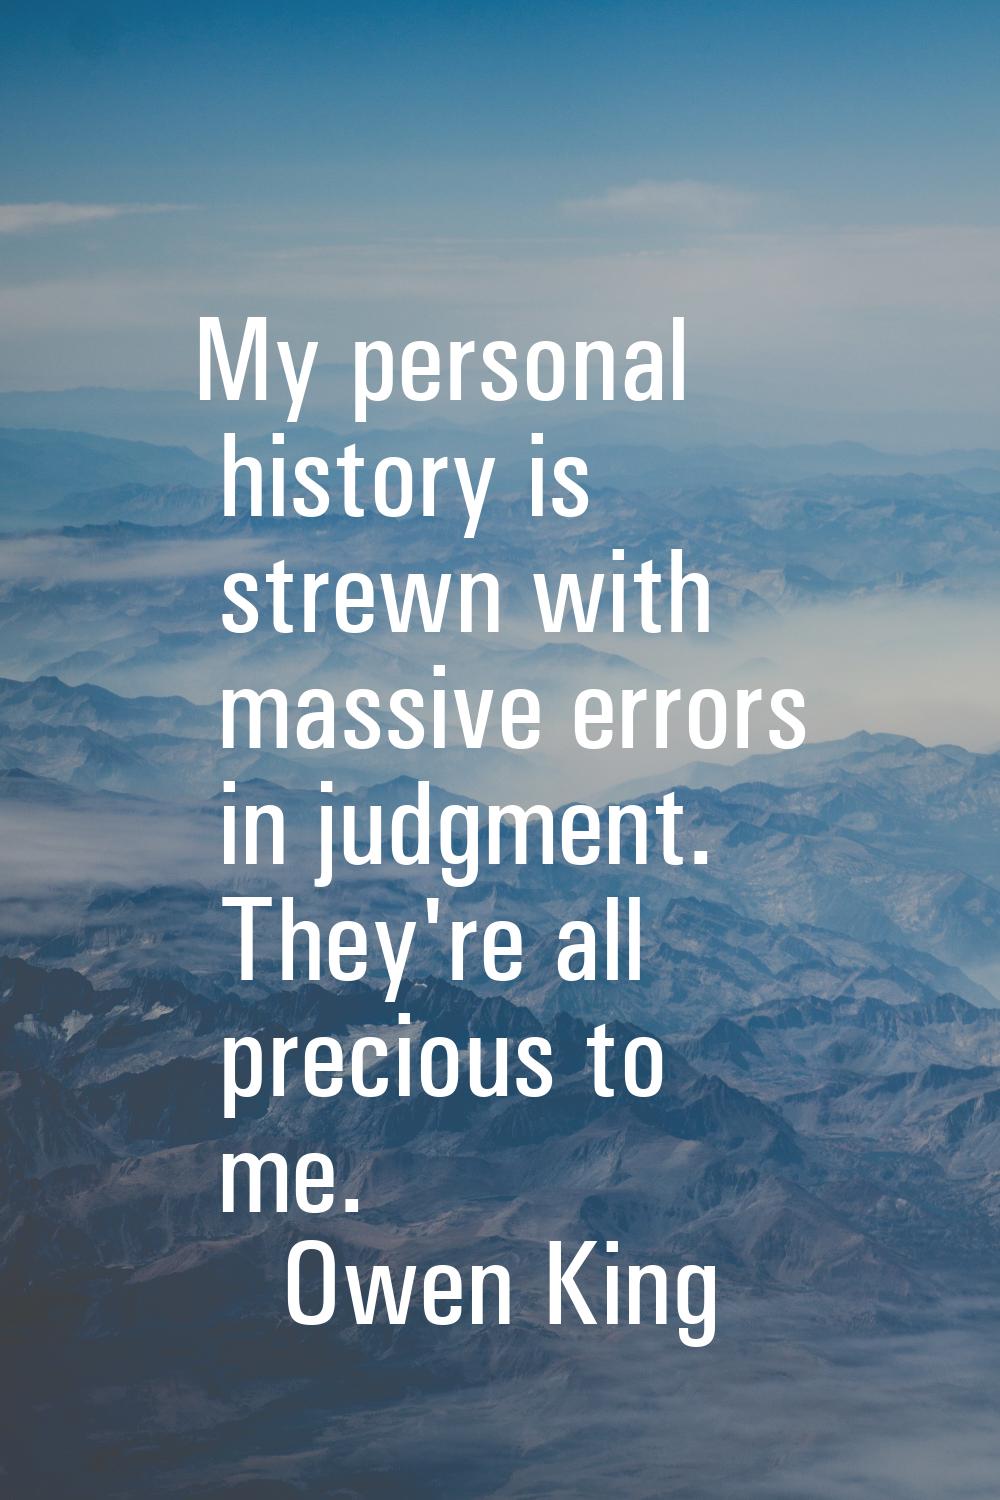 My personal history is strewn with massive errors in judgment. They're all precious to me.